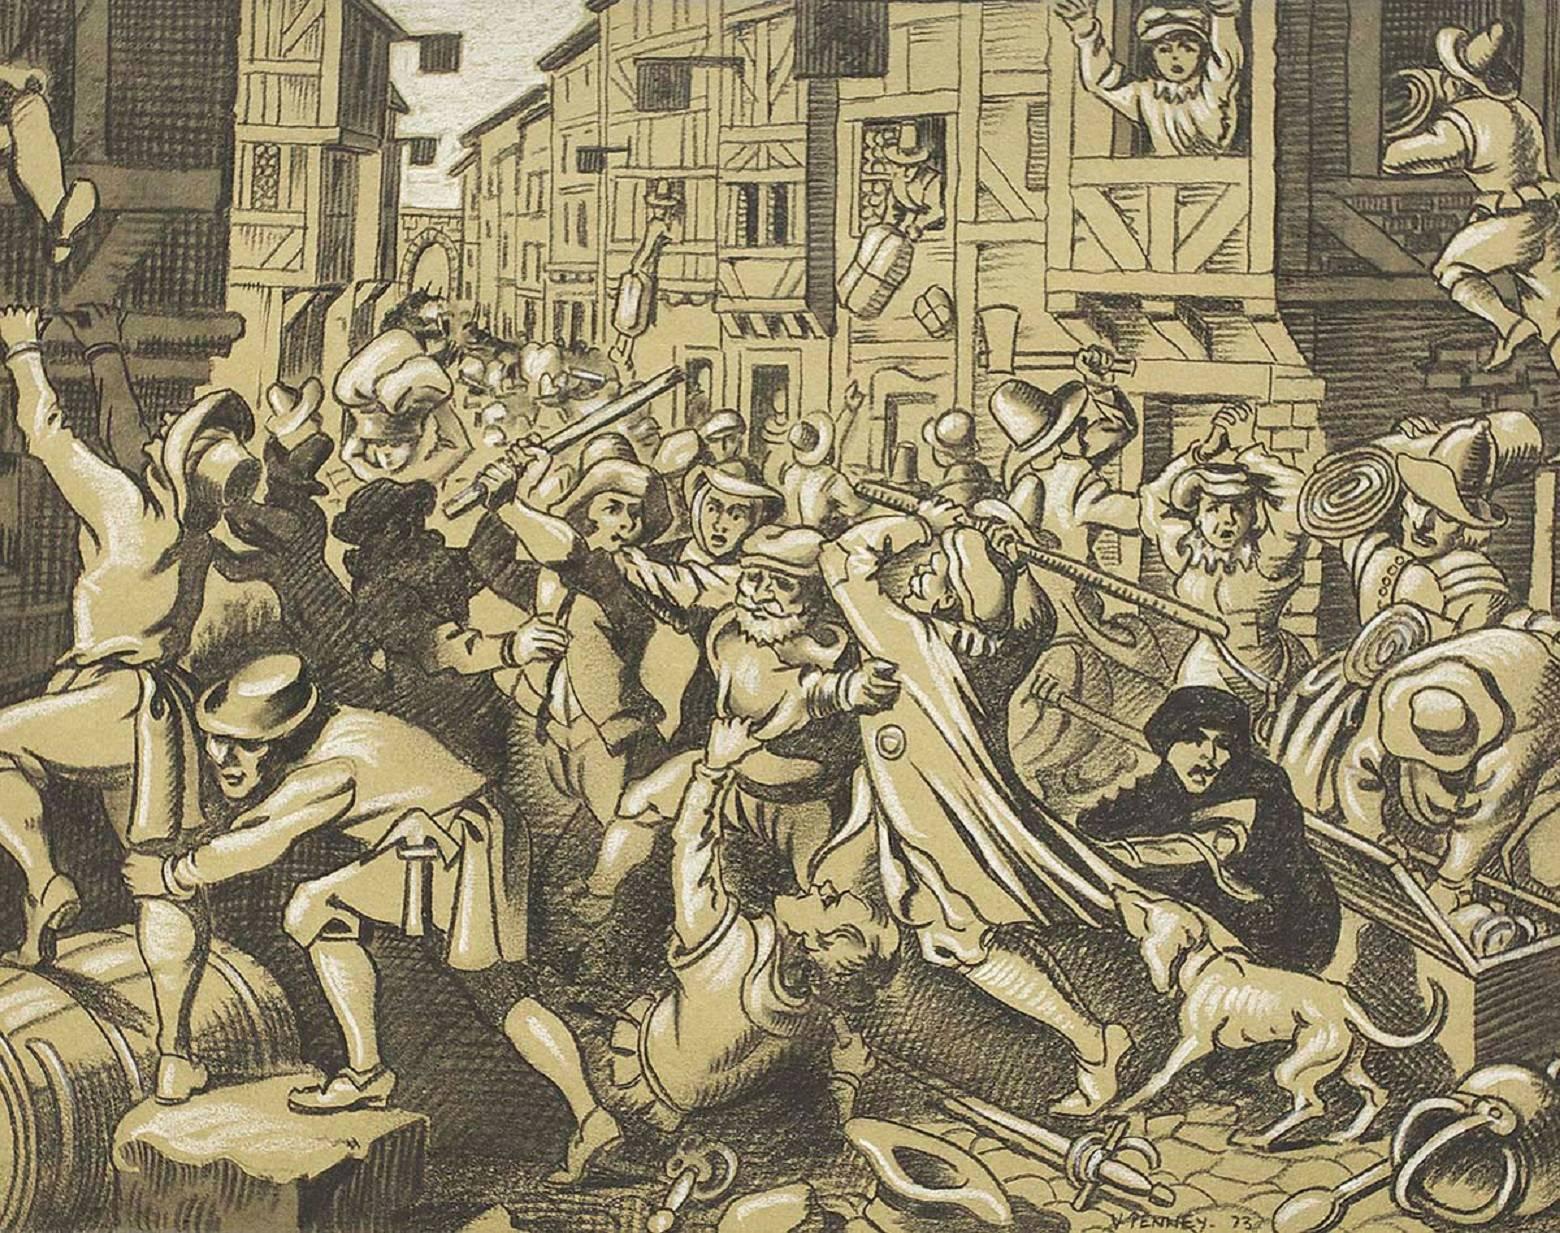 Plunder at the Jewish Ghetto, Chalk and Charcoal 'Progrom' Drawing - Art by Victor E. Penney